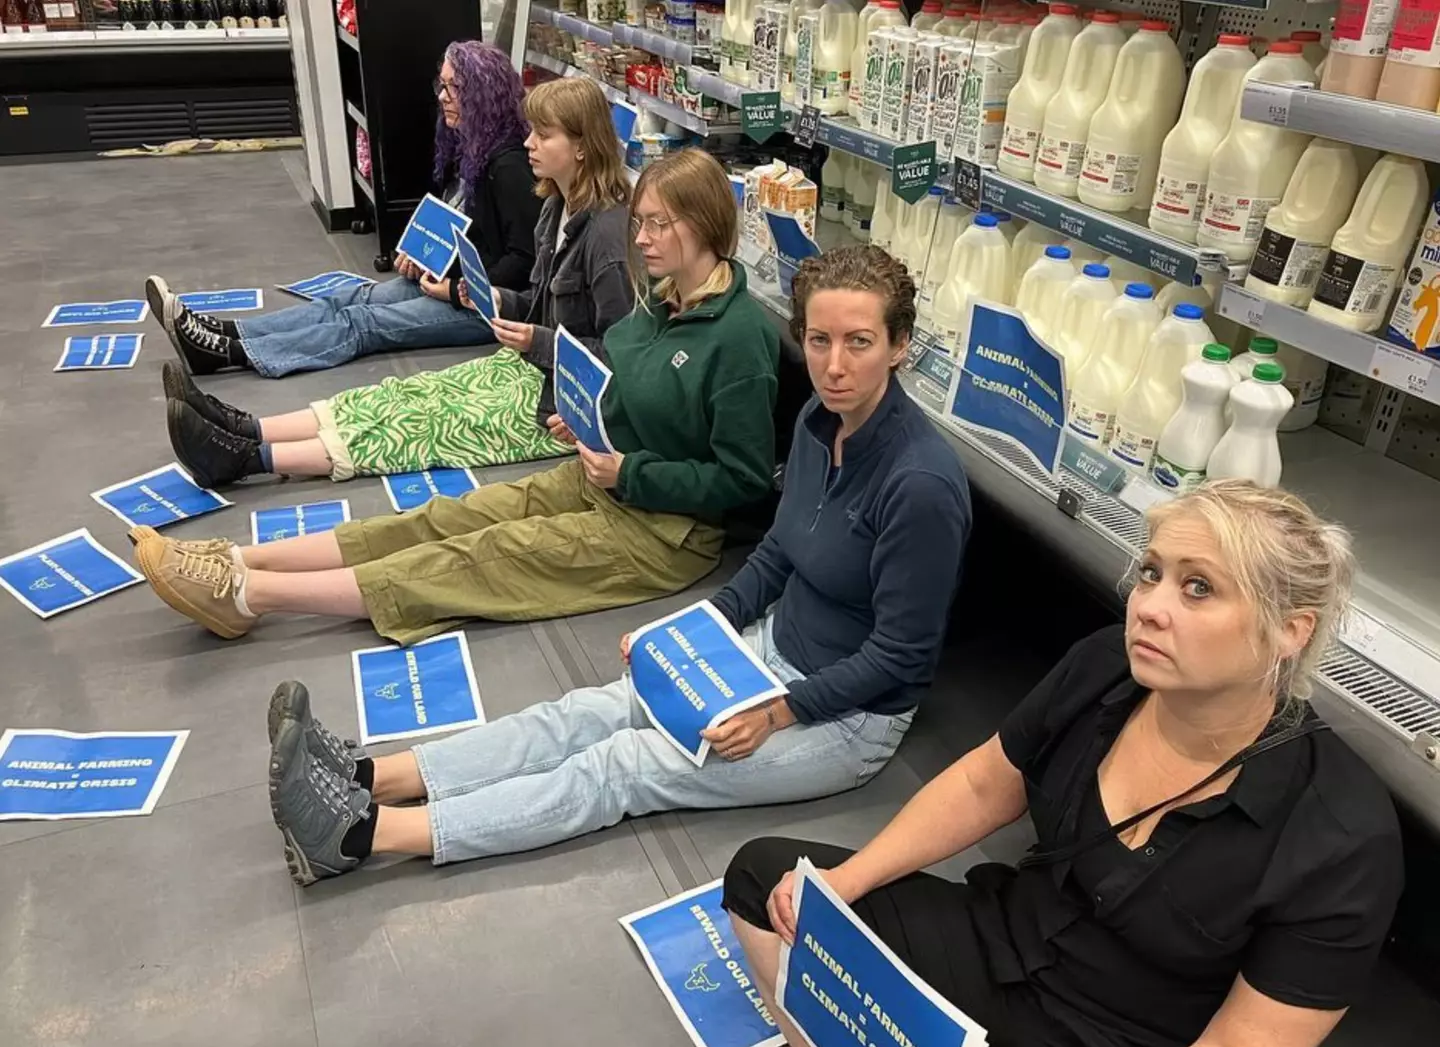 Activists from Animal Rebellion have targeted UK supermarkets and have tried to prevent shoppers from buying milk.